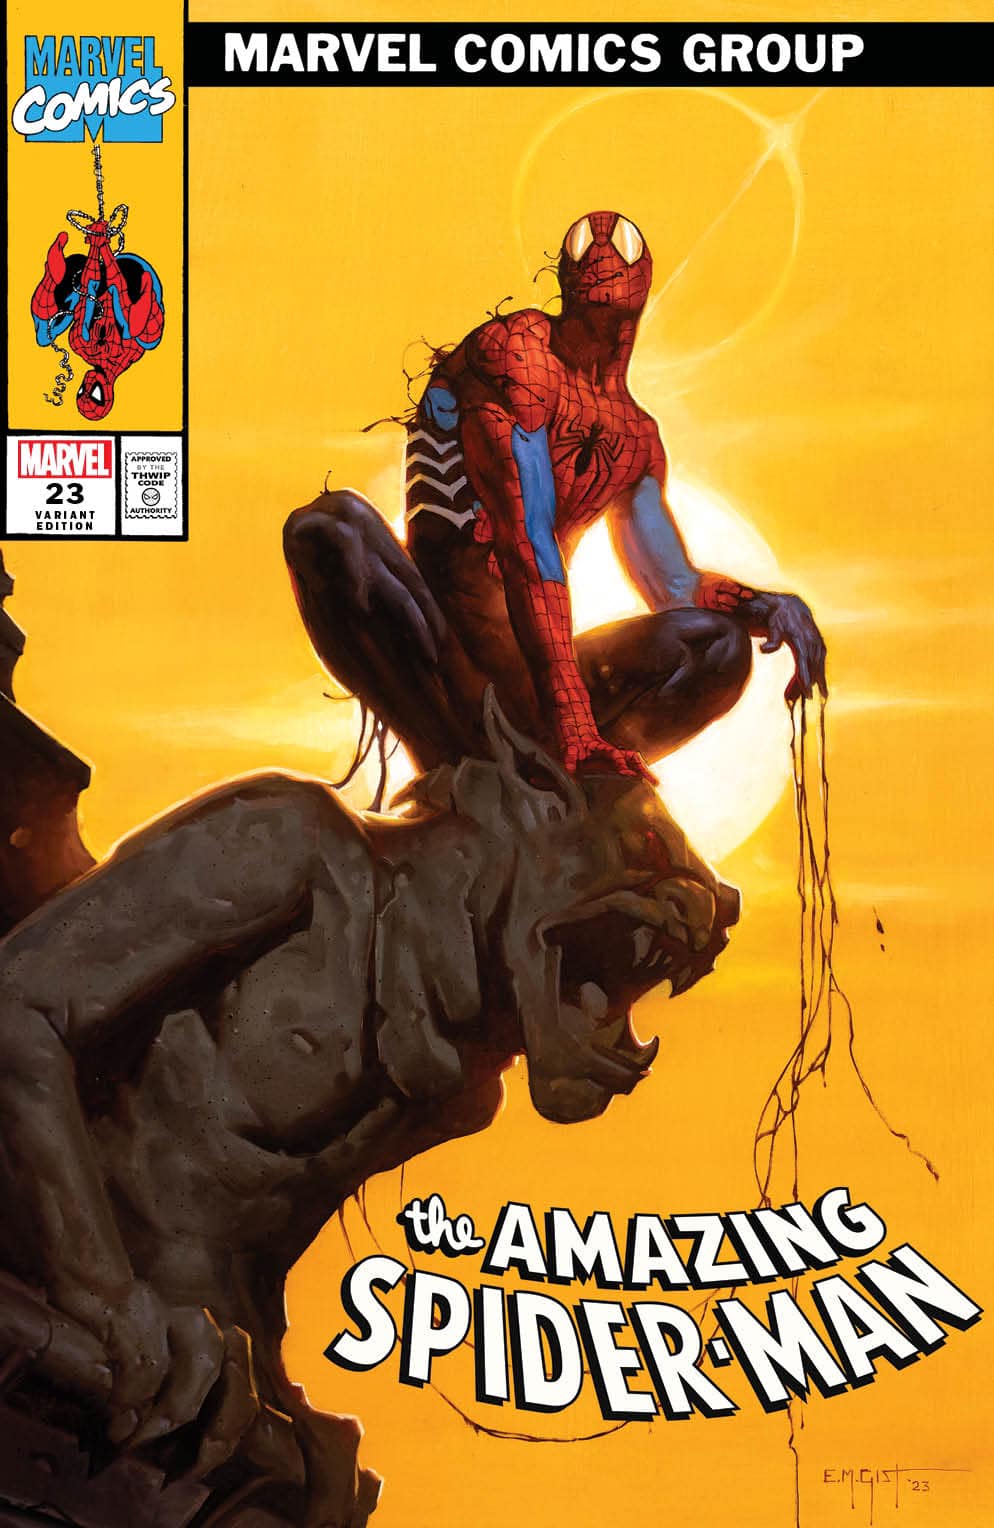 Amazing Spider-Man #23 Trinity Vegas Con Exclusive by E.M Gist